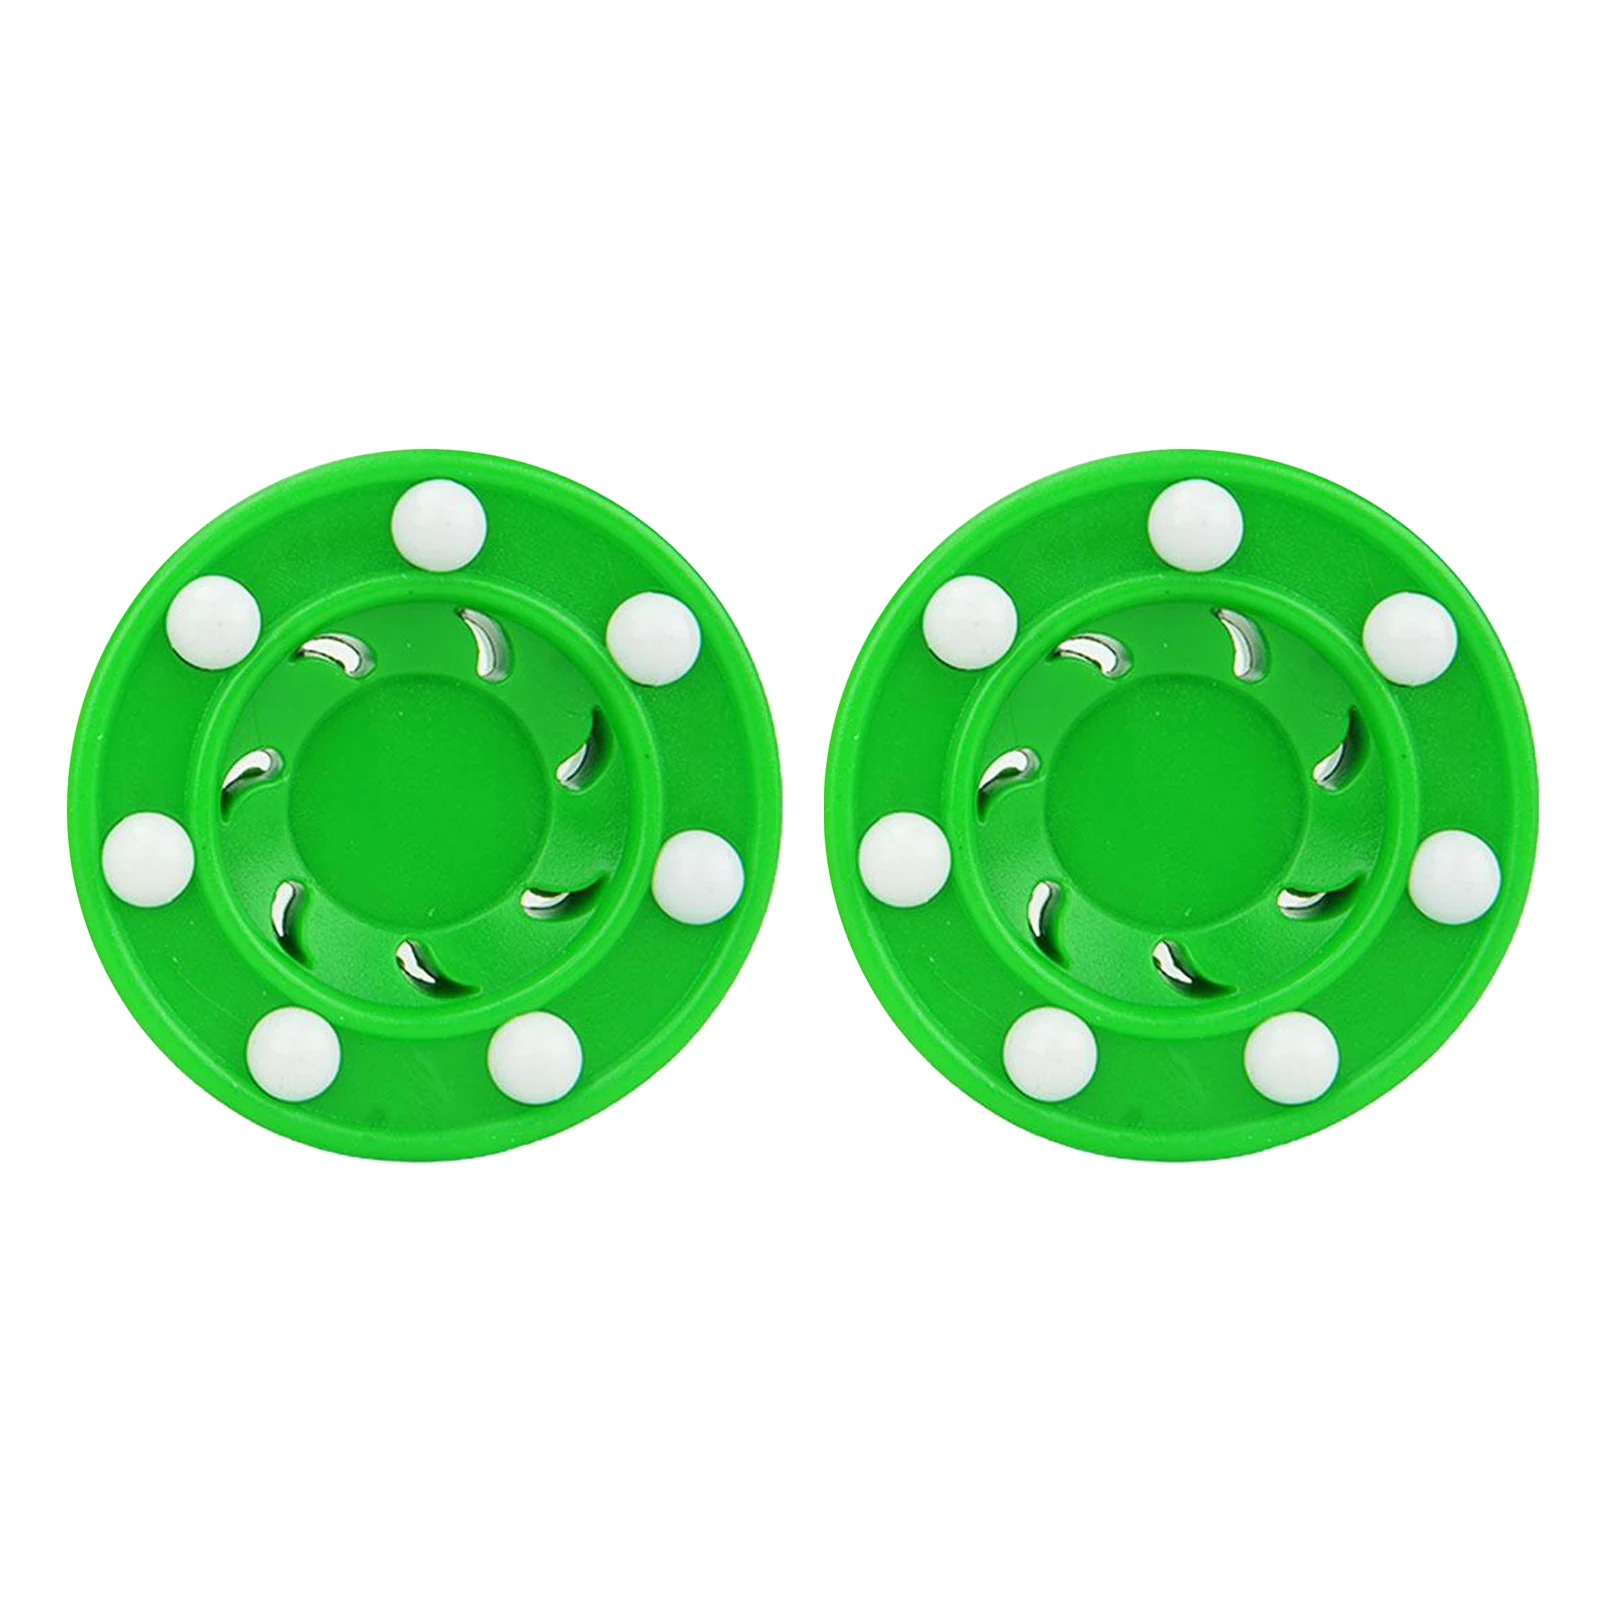 2x Roller Hockey Game Puck 120G for Practicing and Classic Training Diameter 3